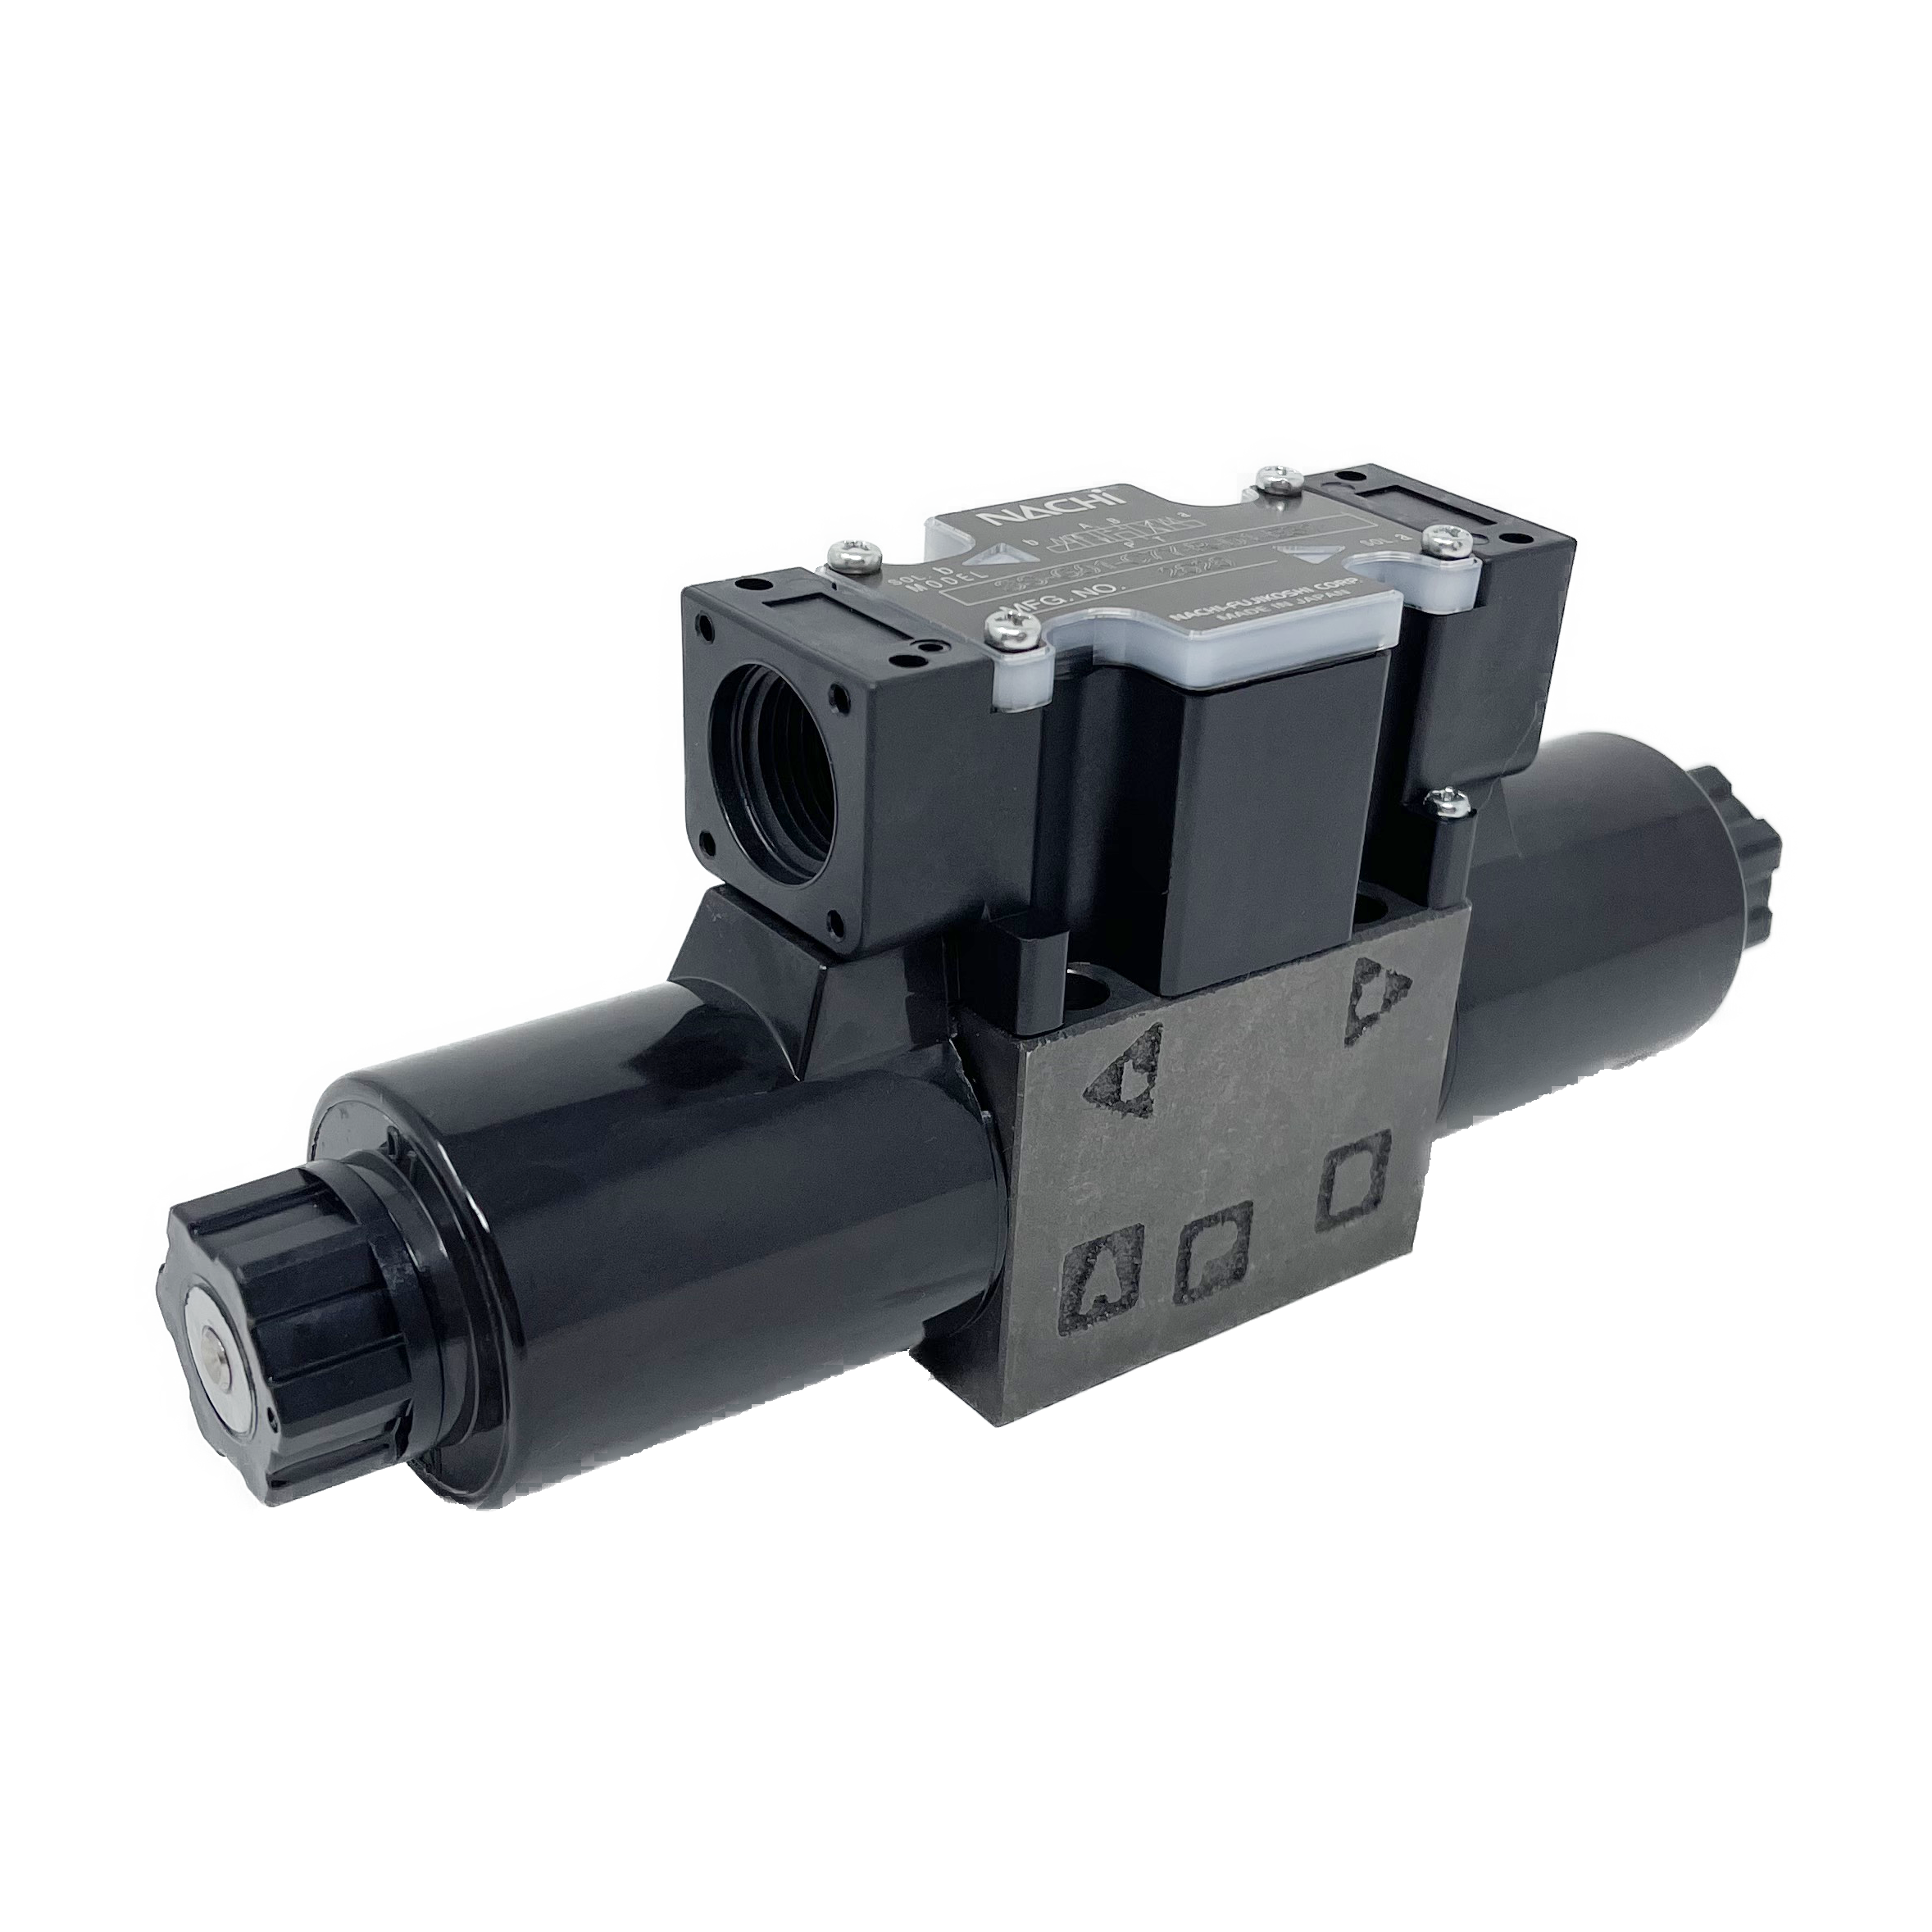 SS-G01-C4-R-E115-E31 : Nachi Solenoid Valve, 3P4W, D03 (NG6), 13.2GPM, 5075psi, All Ports Open Neutral, 115 VAC, Wiring Box with Lights & Built-in Rectifier